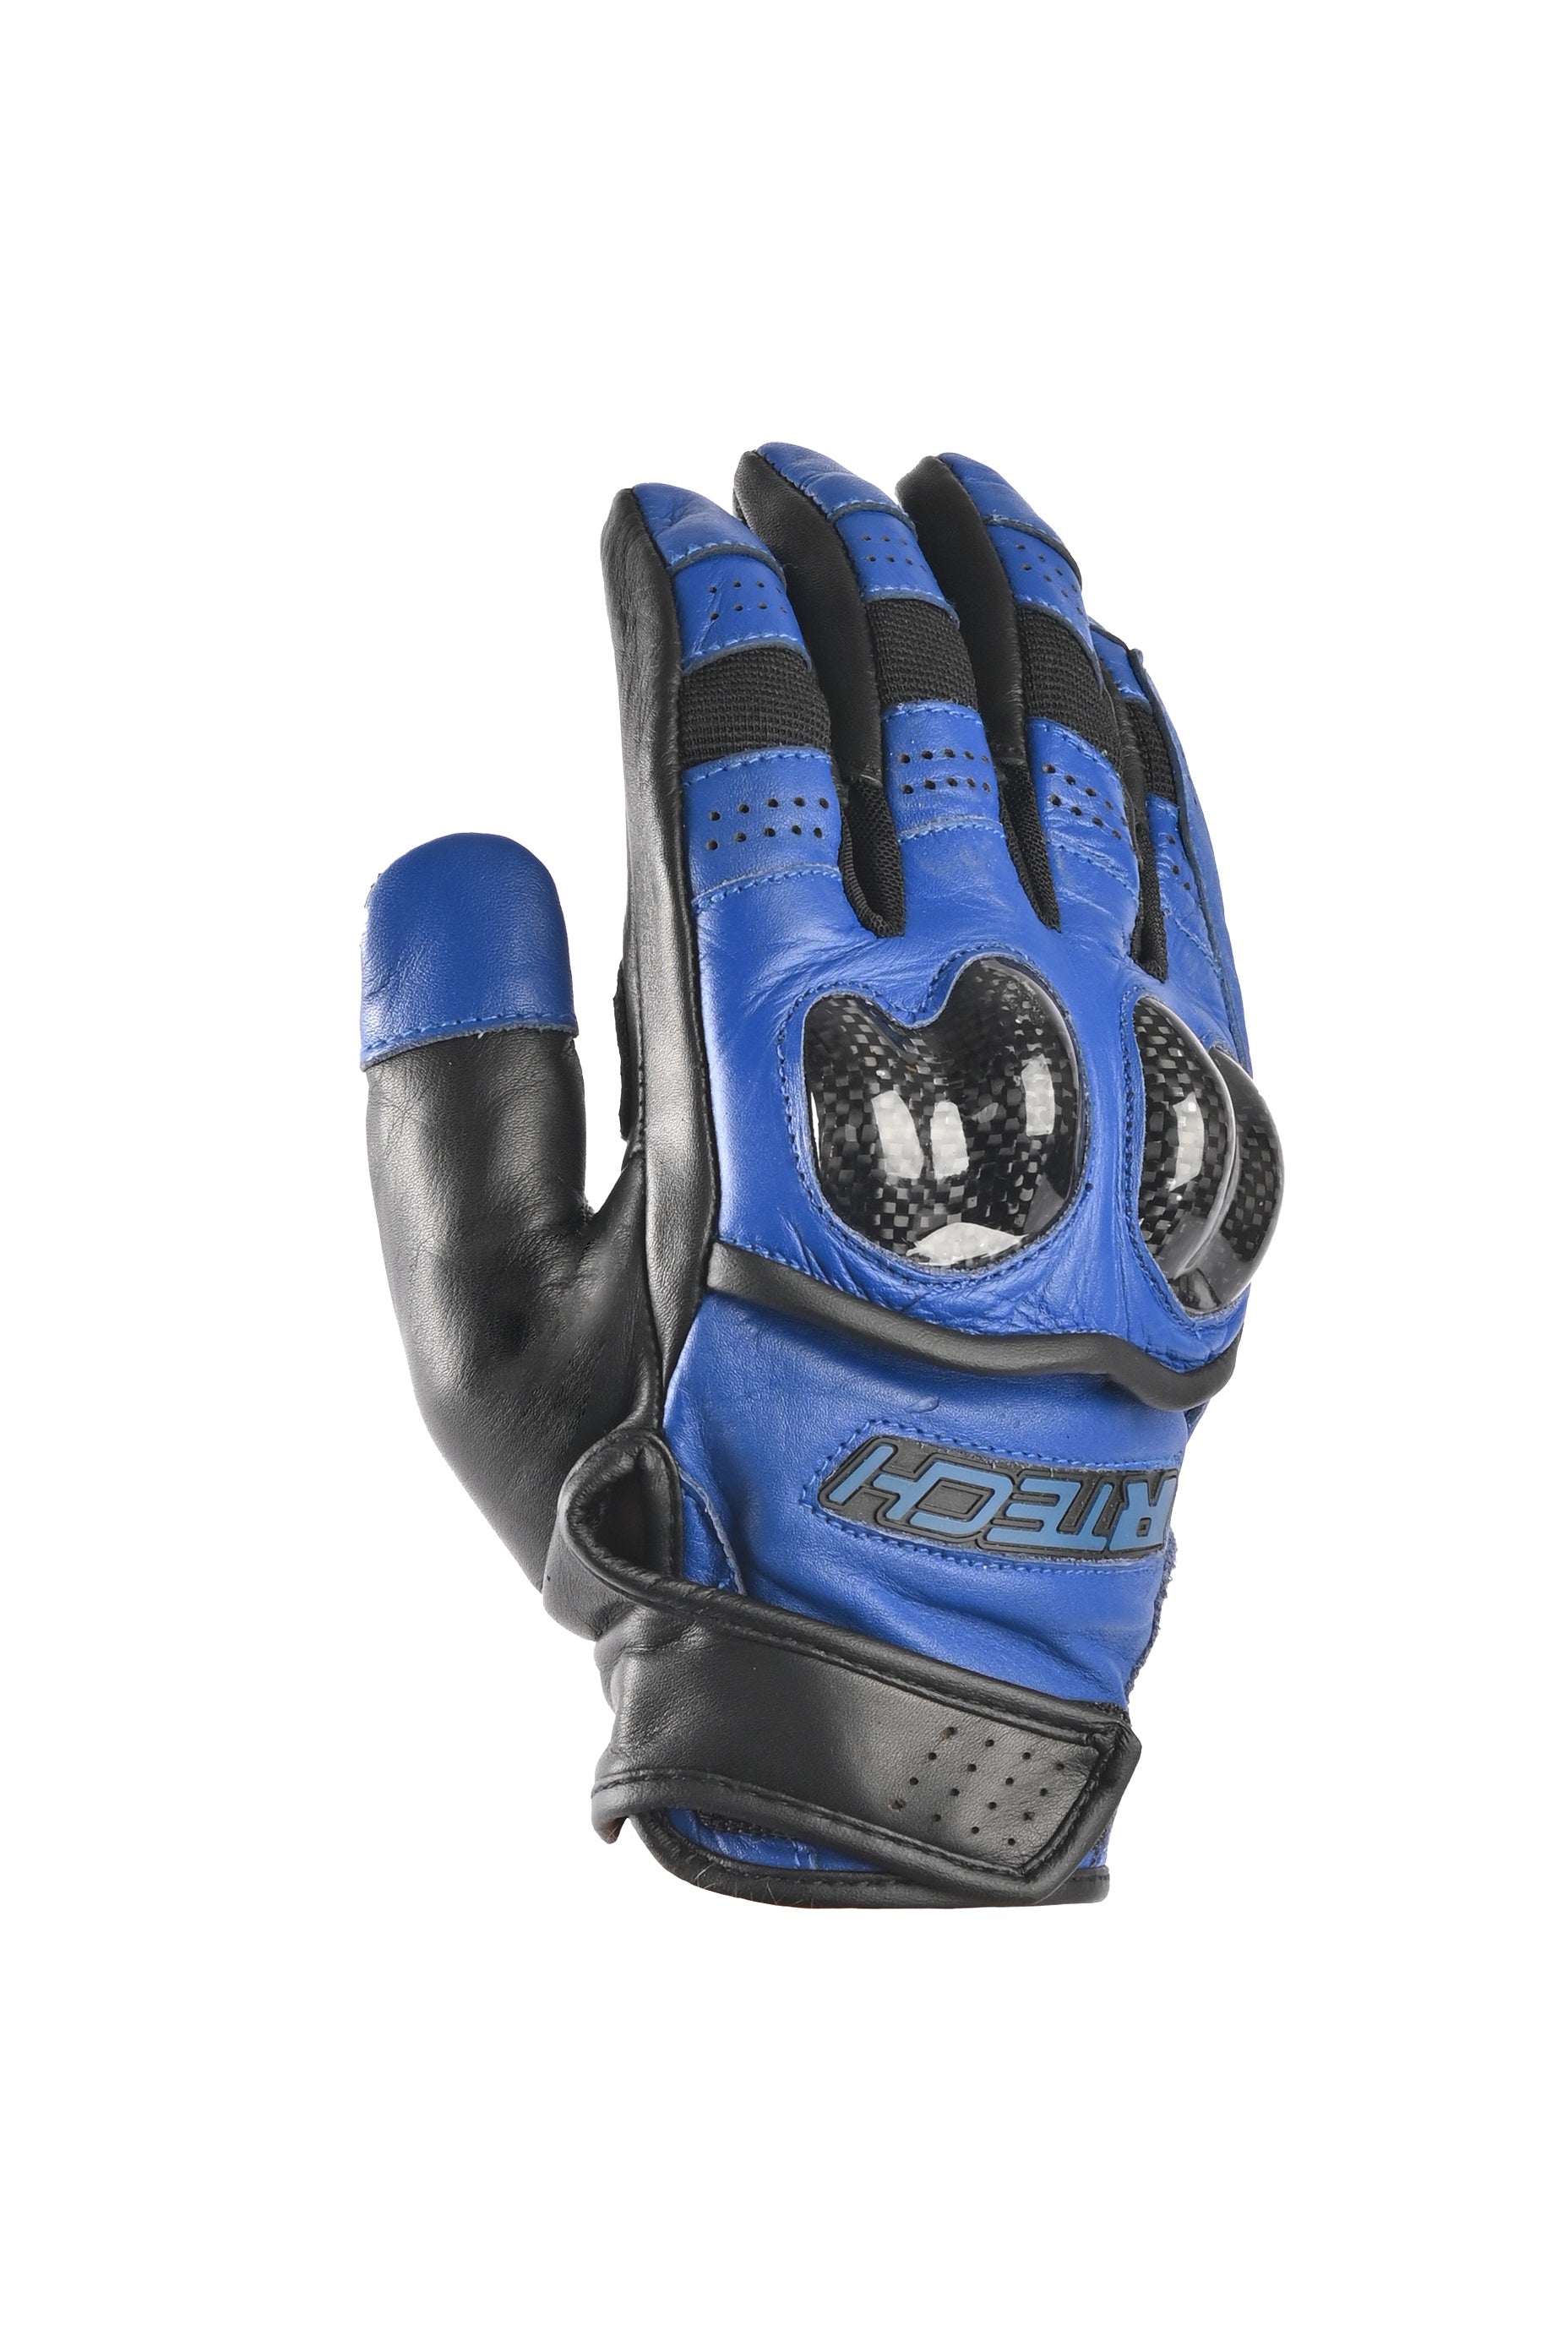 r-tech falcon black and blue gloves back side view